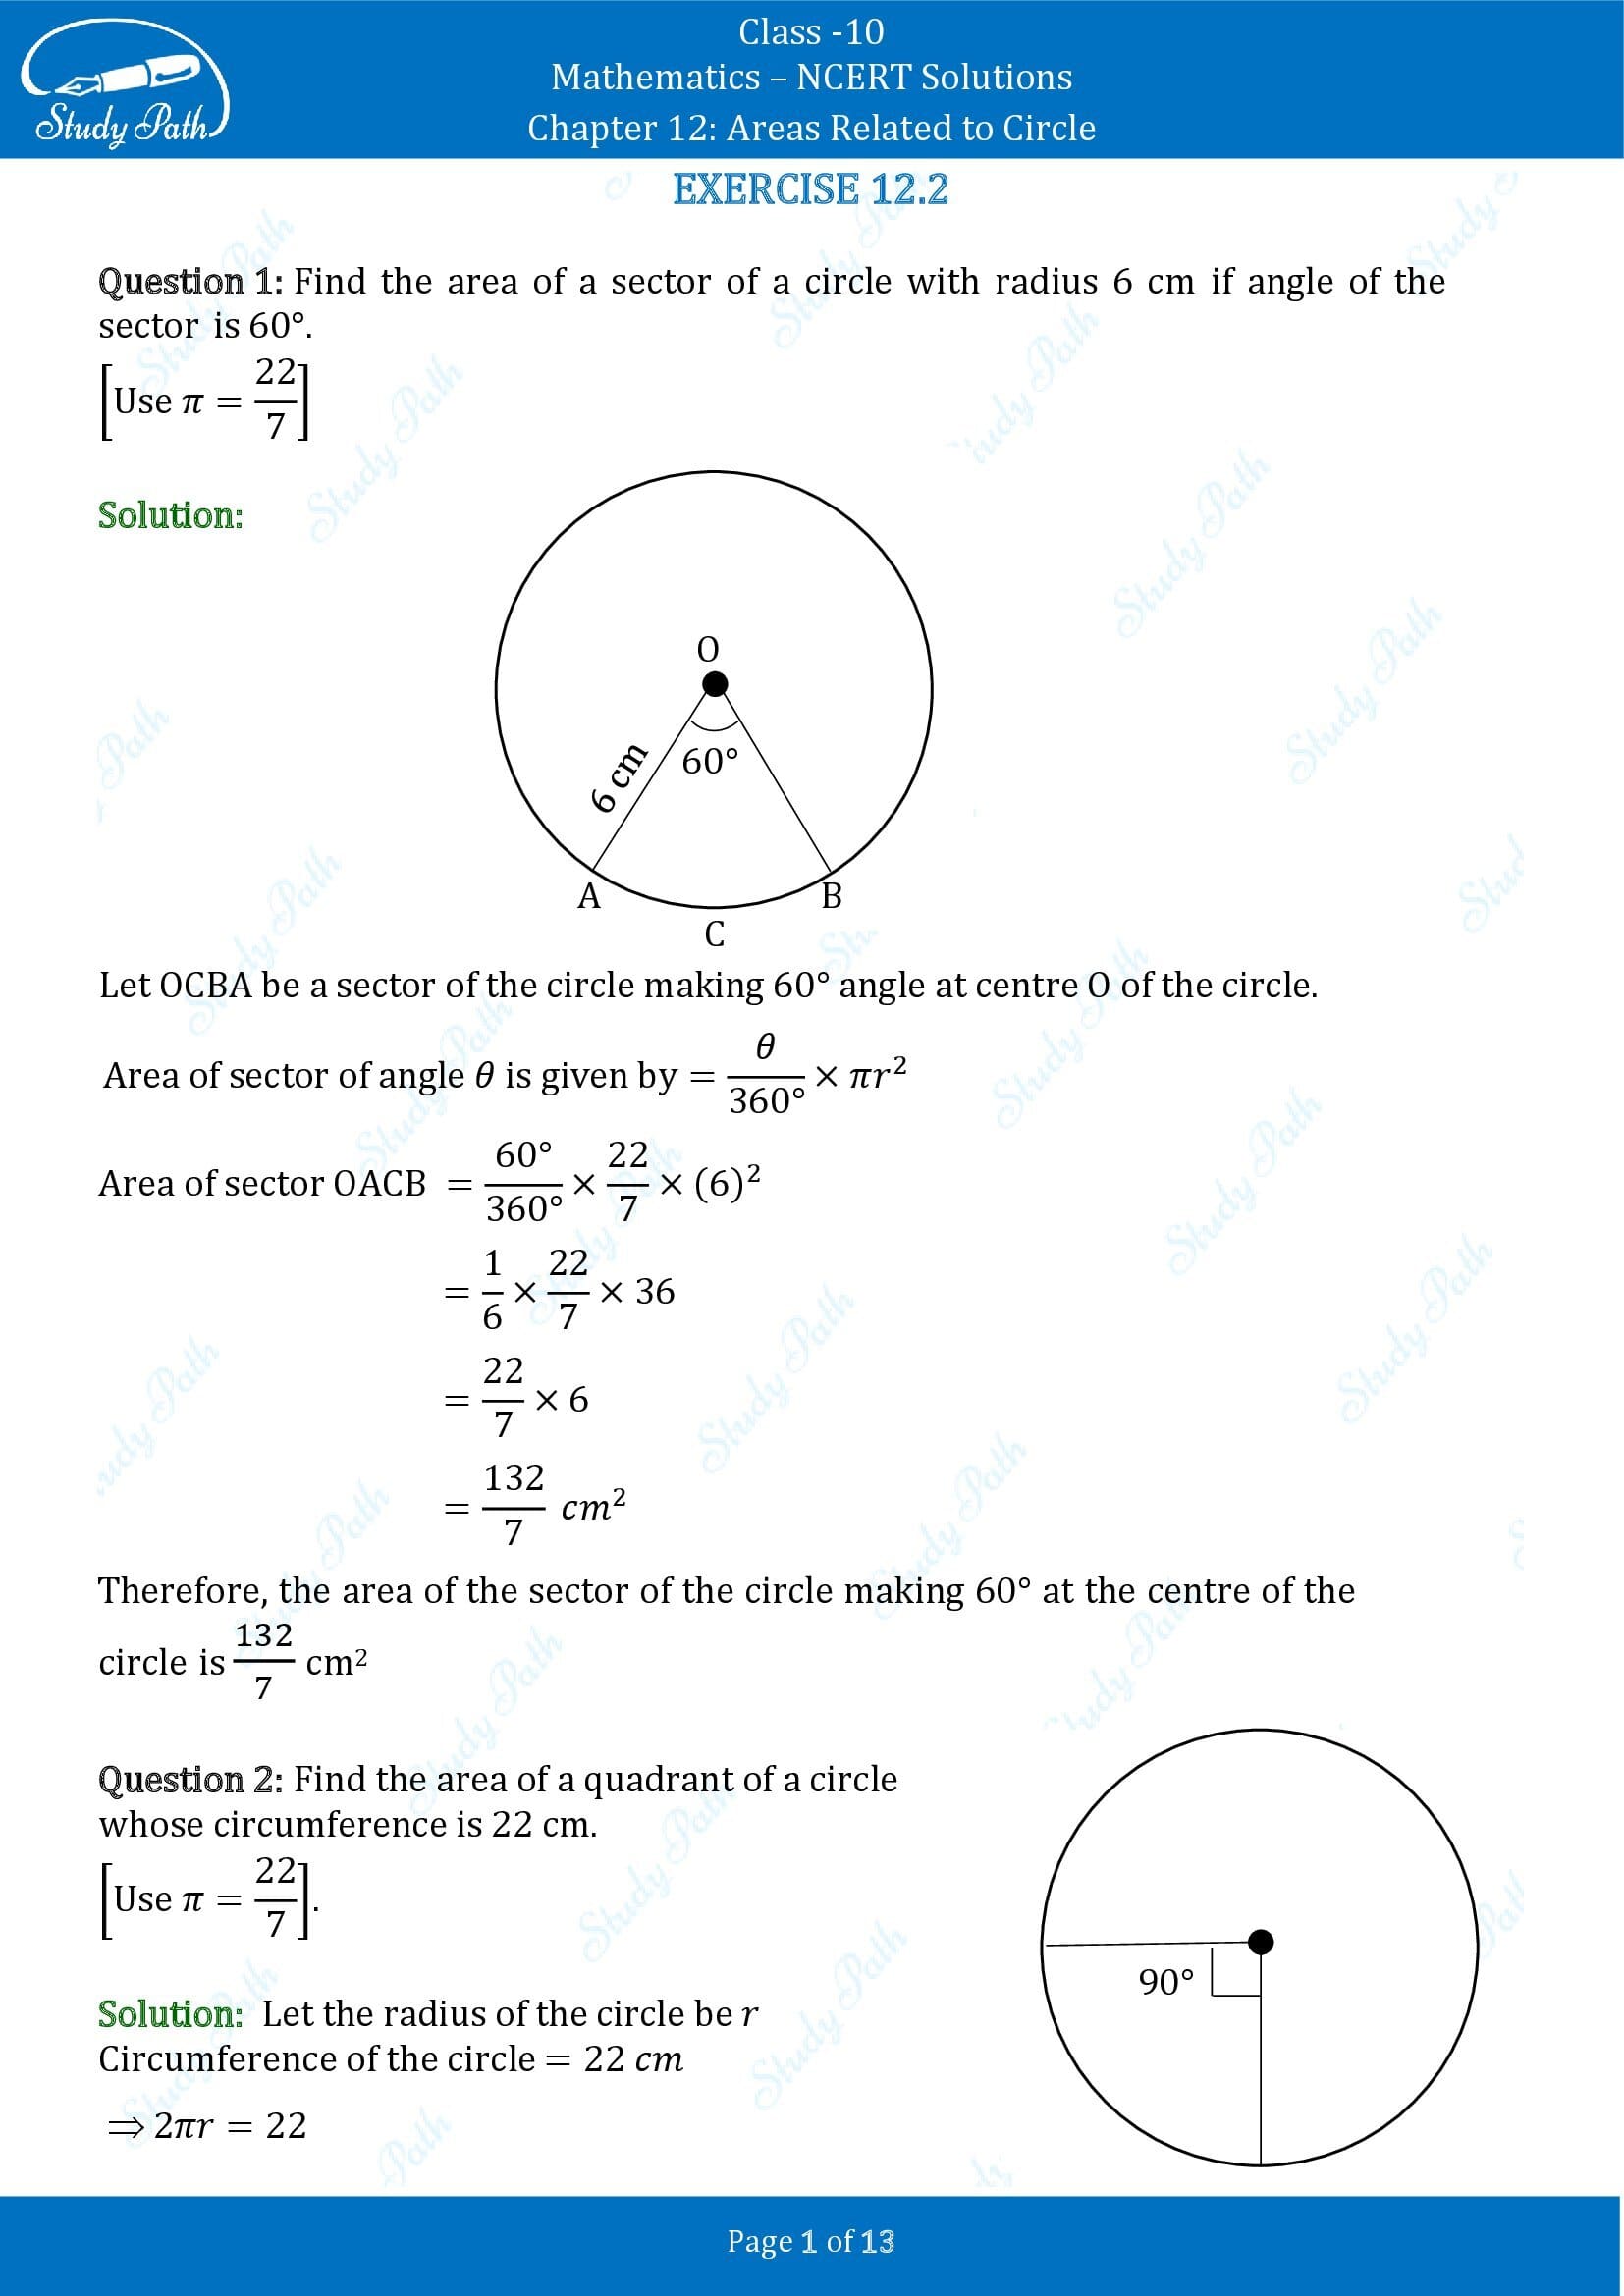 NCERT Solutions for Class 10 Maths Chapter 12 Areas Related to Circles Exercise 12.2 00001